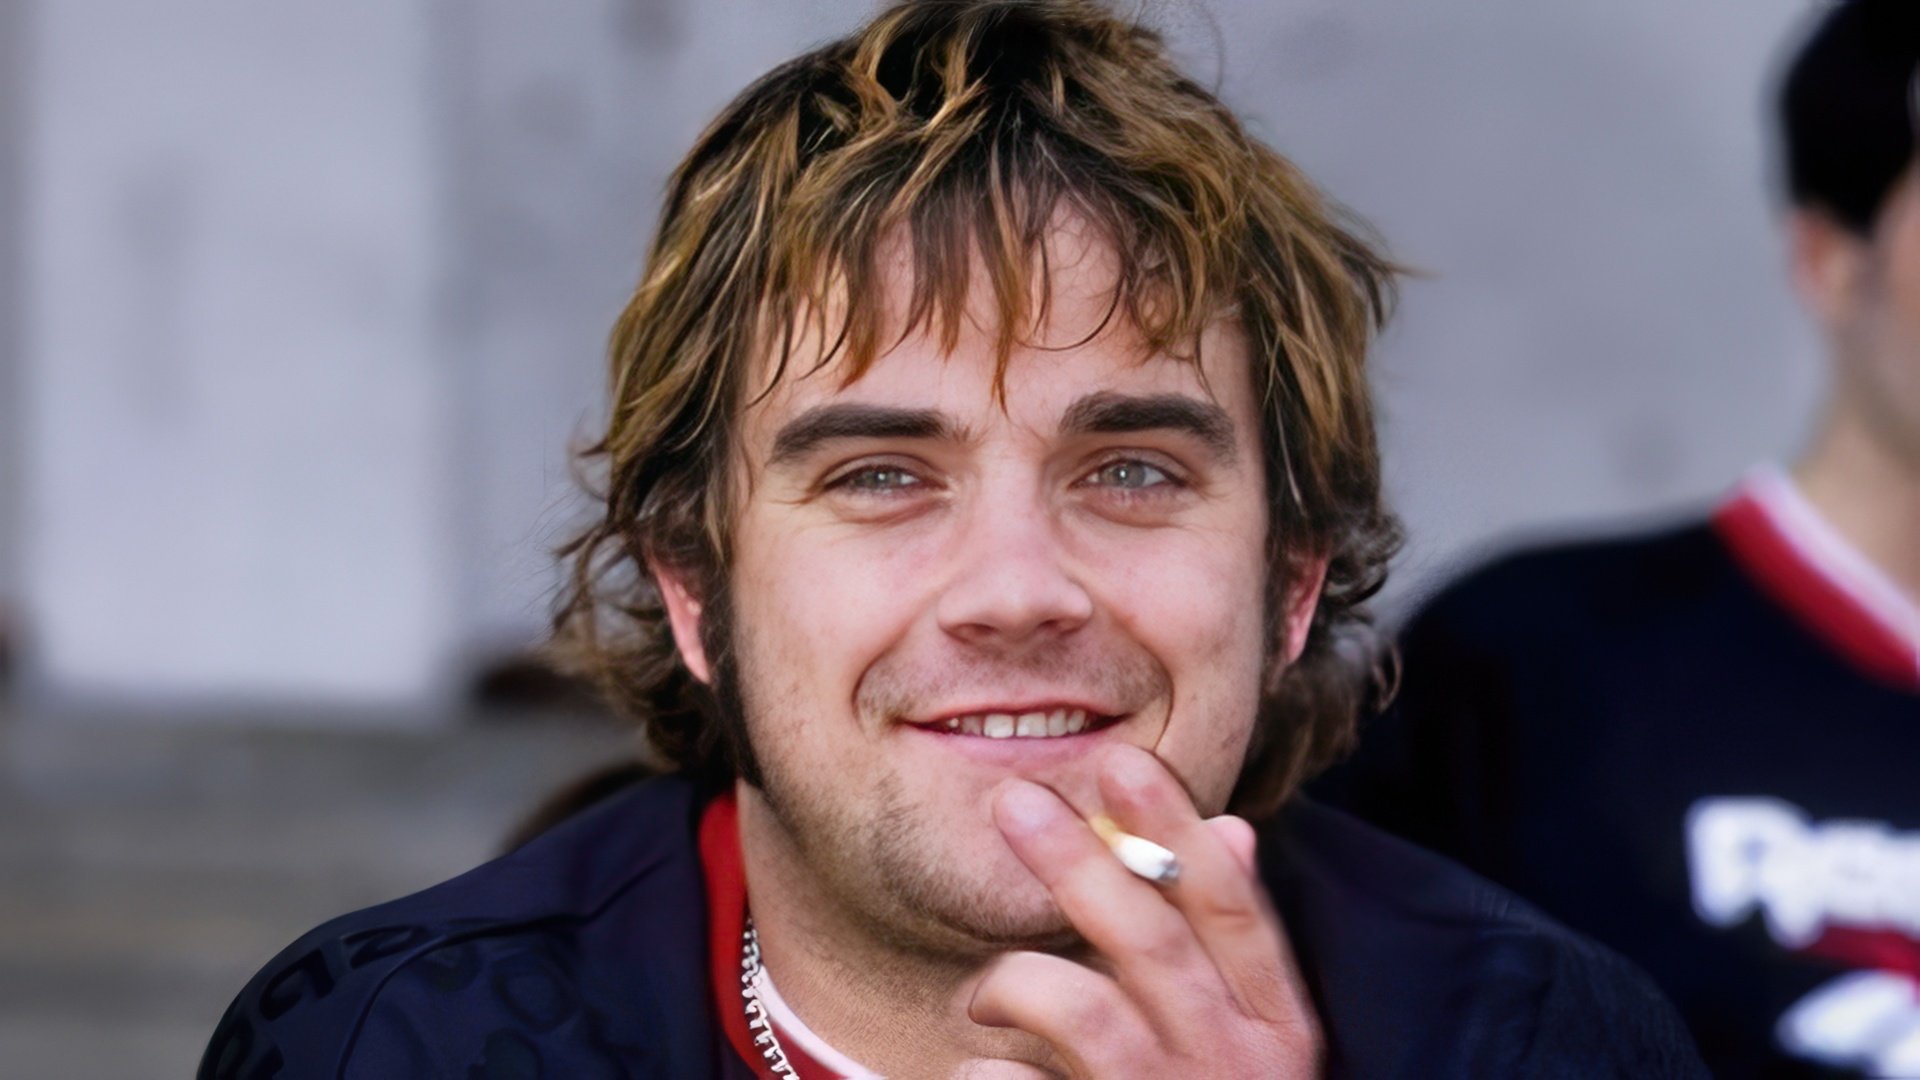 Robbie Williams after leaving Take That in 1996